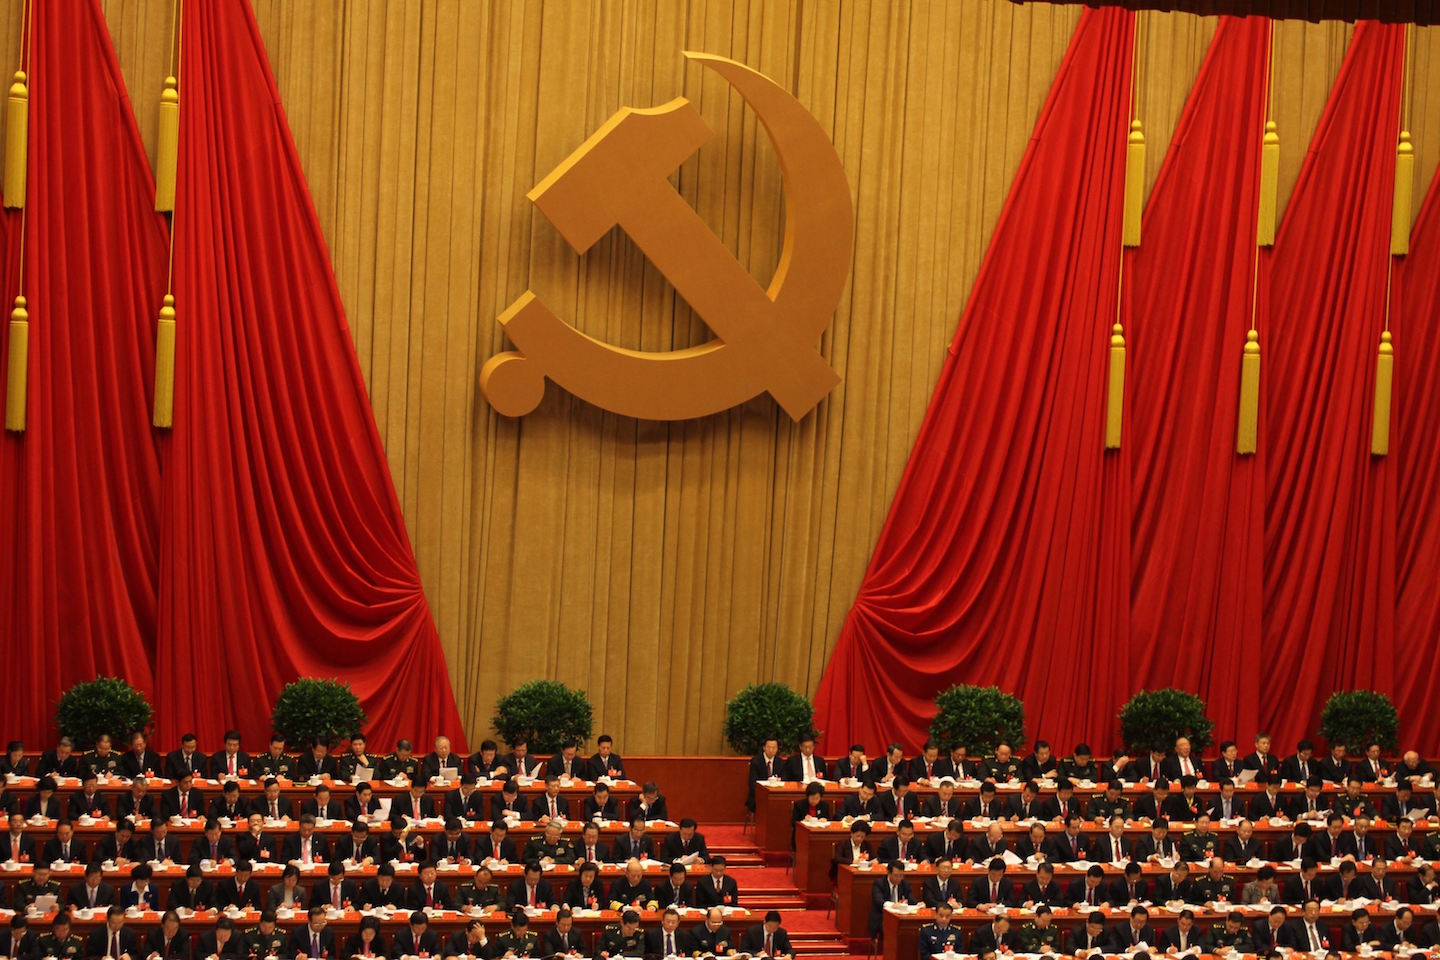 Image: Chinese labor camp survivor explains why socialism is hell